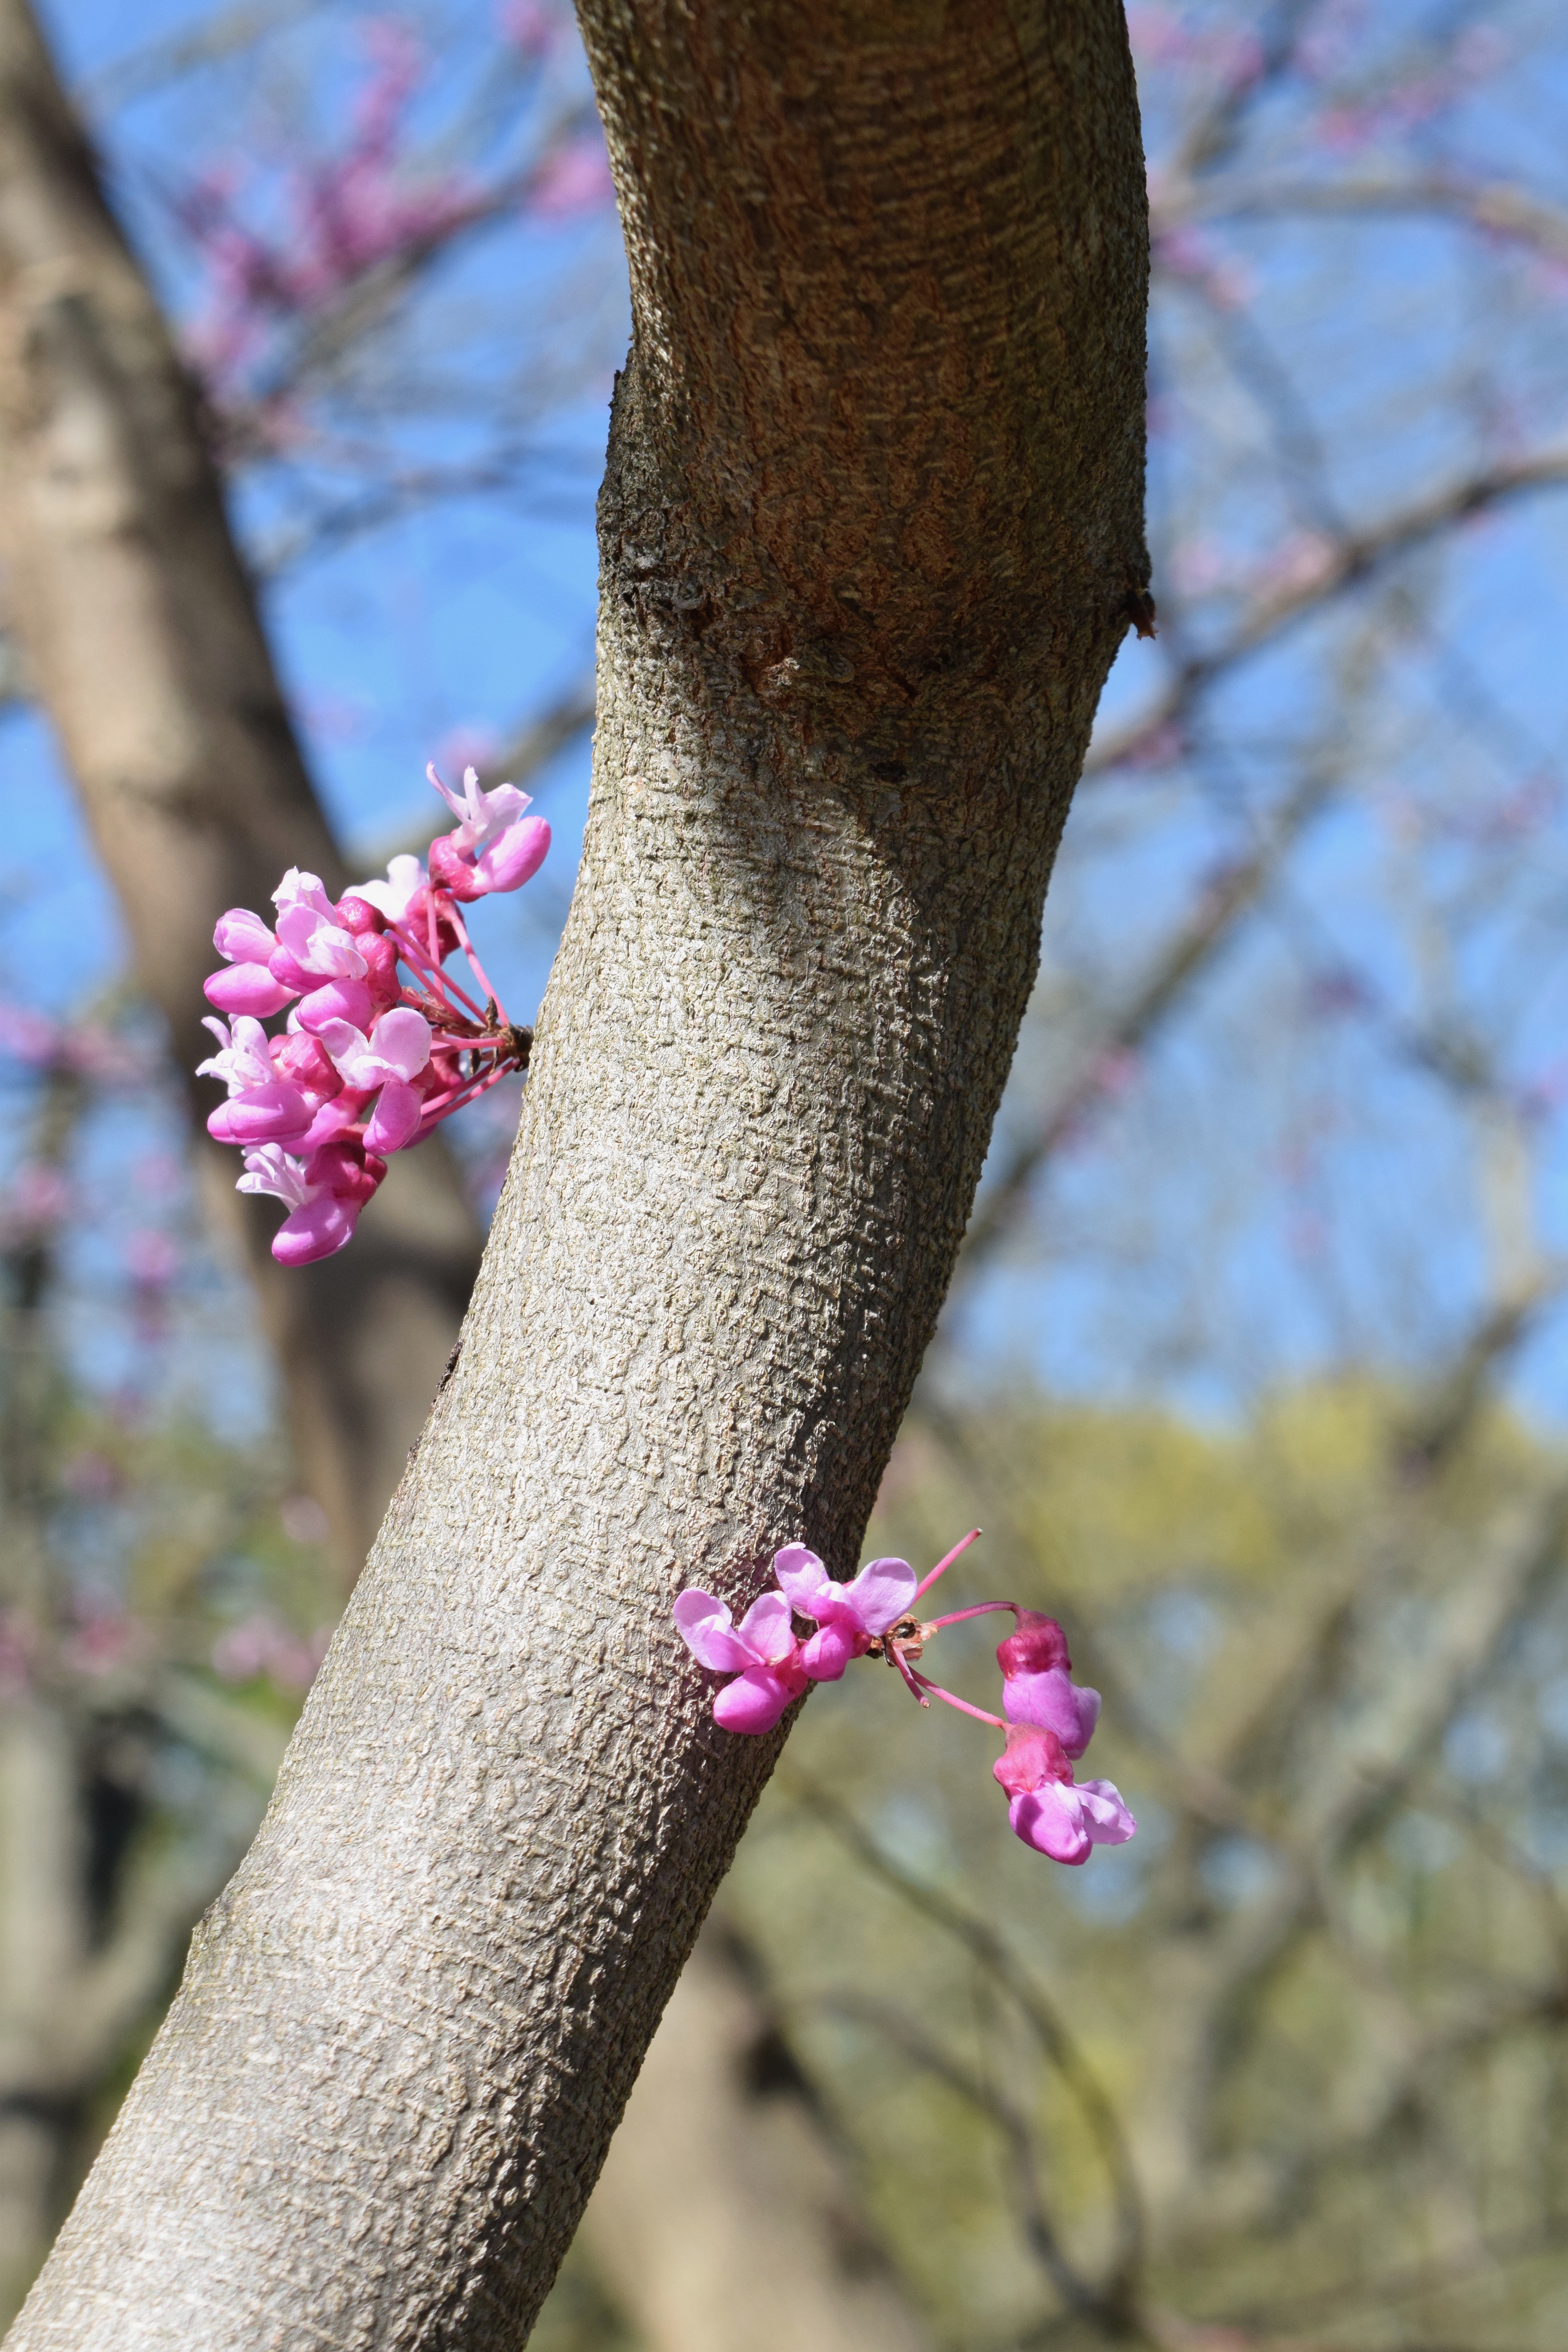 It's the Weekend, Number 106, Blooms on a Redbud Tree